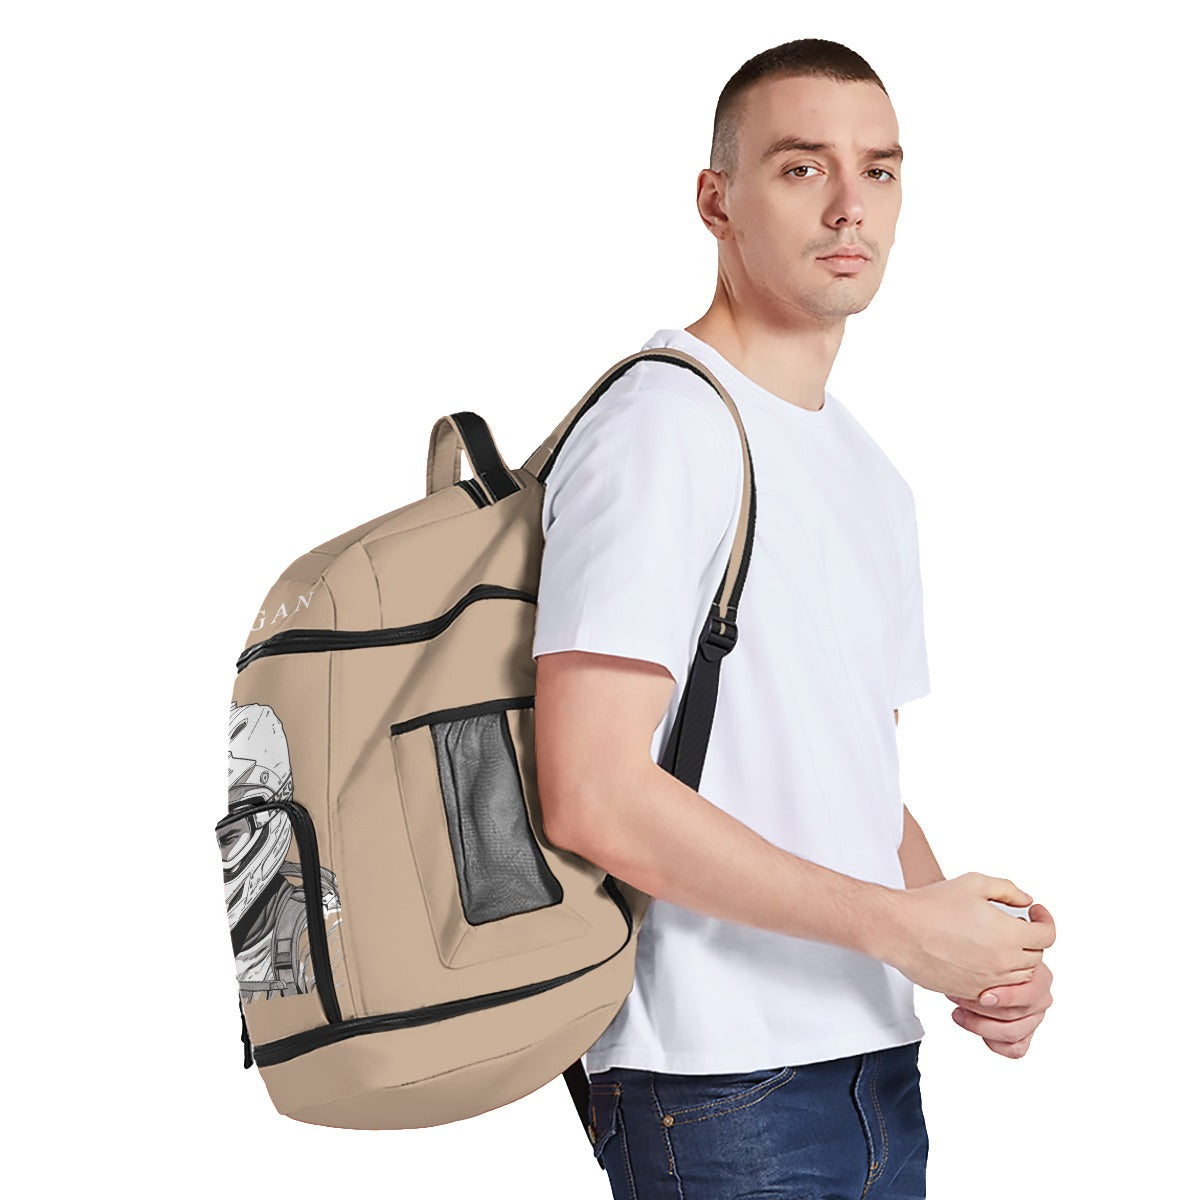 All-Over Print Multifunctional Backpack